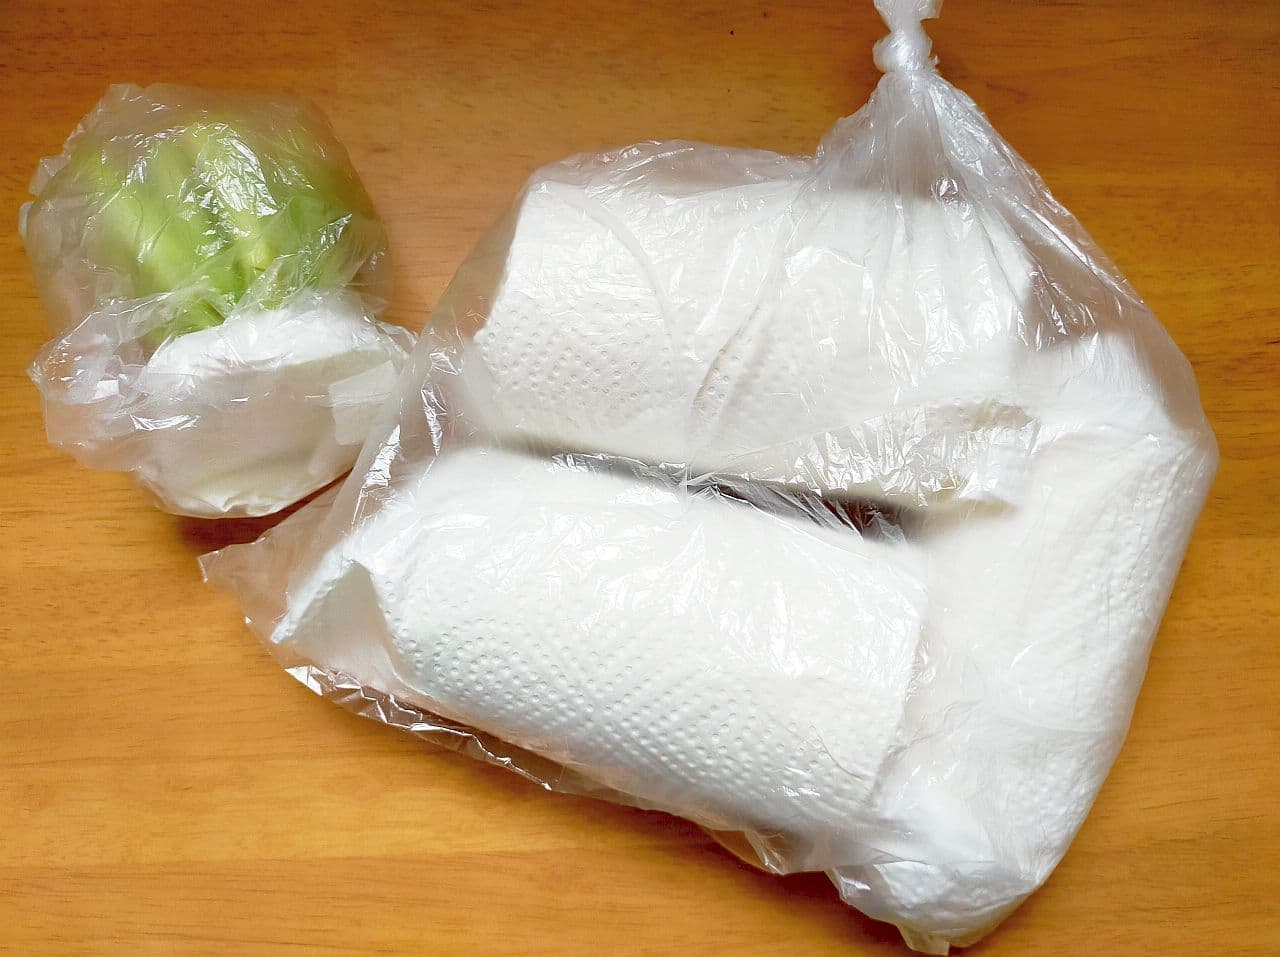 Step 4: How to store "daikon" without shriveling